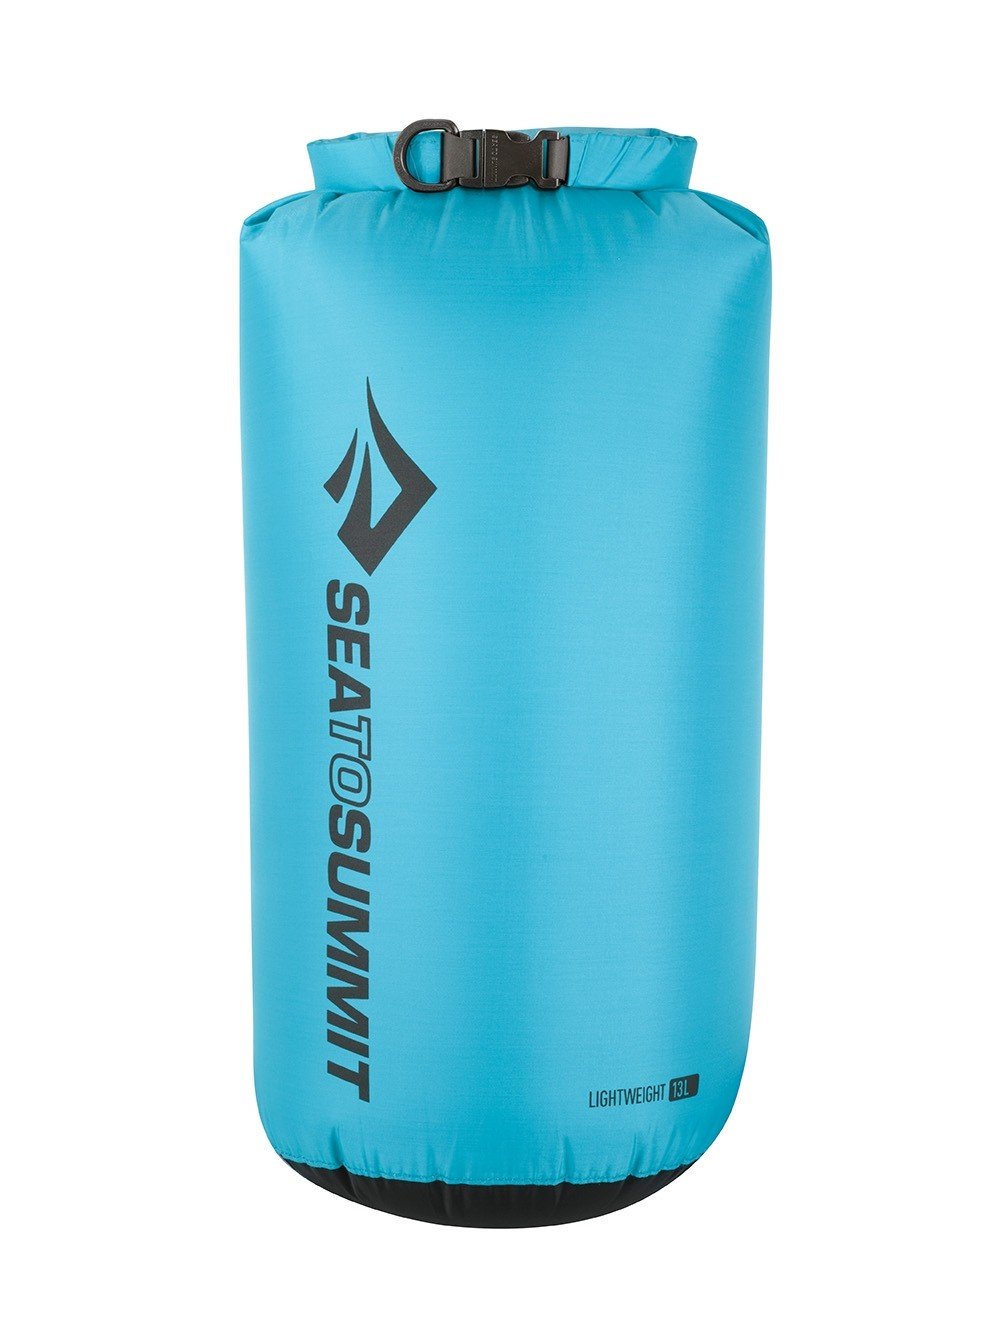 Sea To Summit Lightweight 70D 13 Litres Dry Sack Bags, Packs and Cases Sea To Summit Blue Tactical Gear Supplier Tactical Distributors Australia